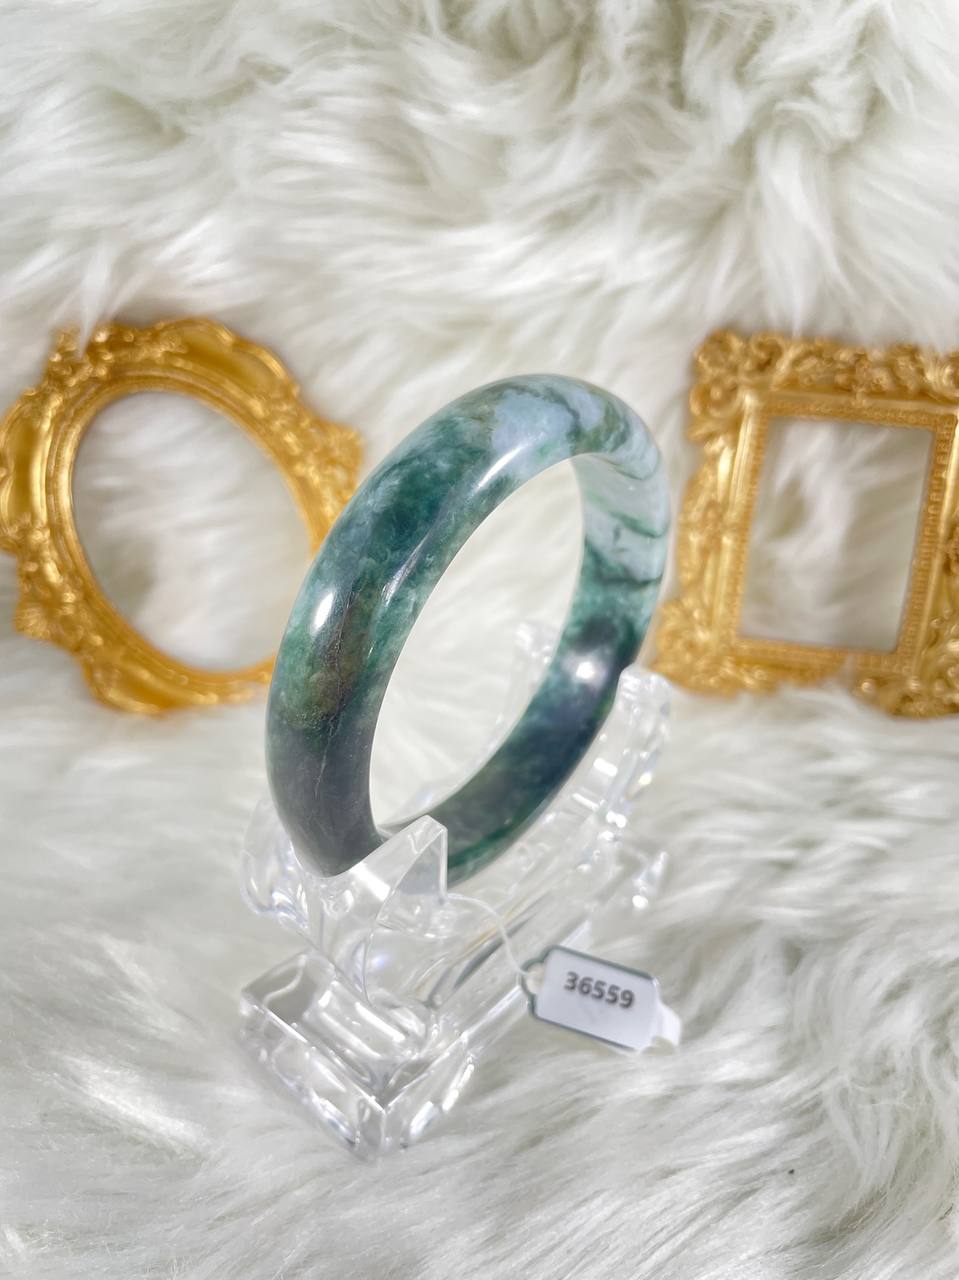 Grade A Natural Jade Bangle with certificate #36559